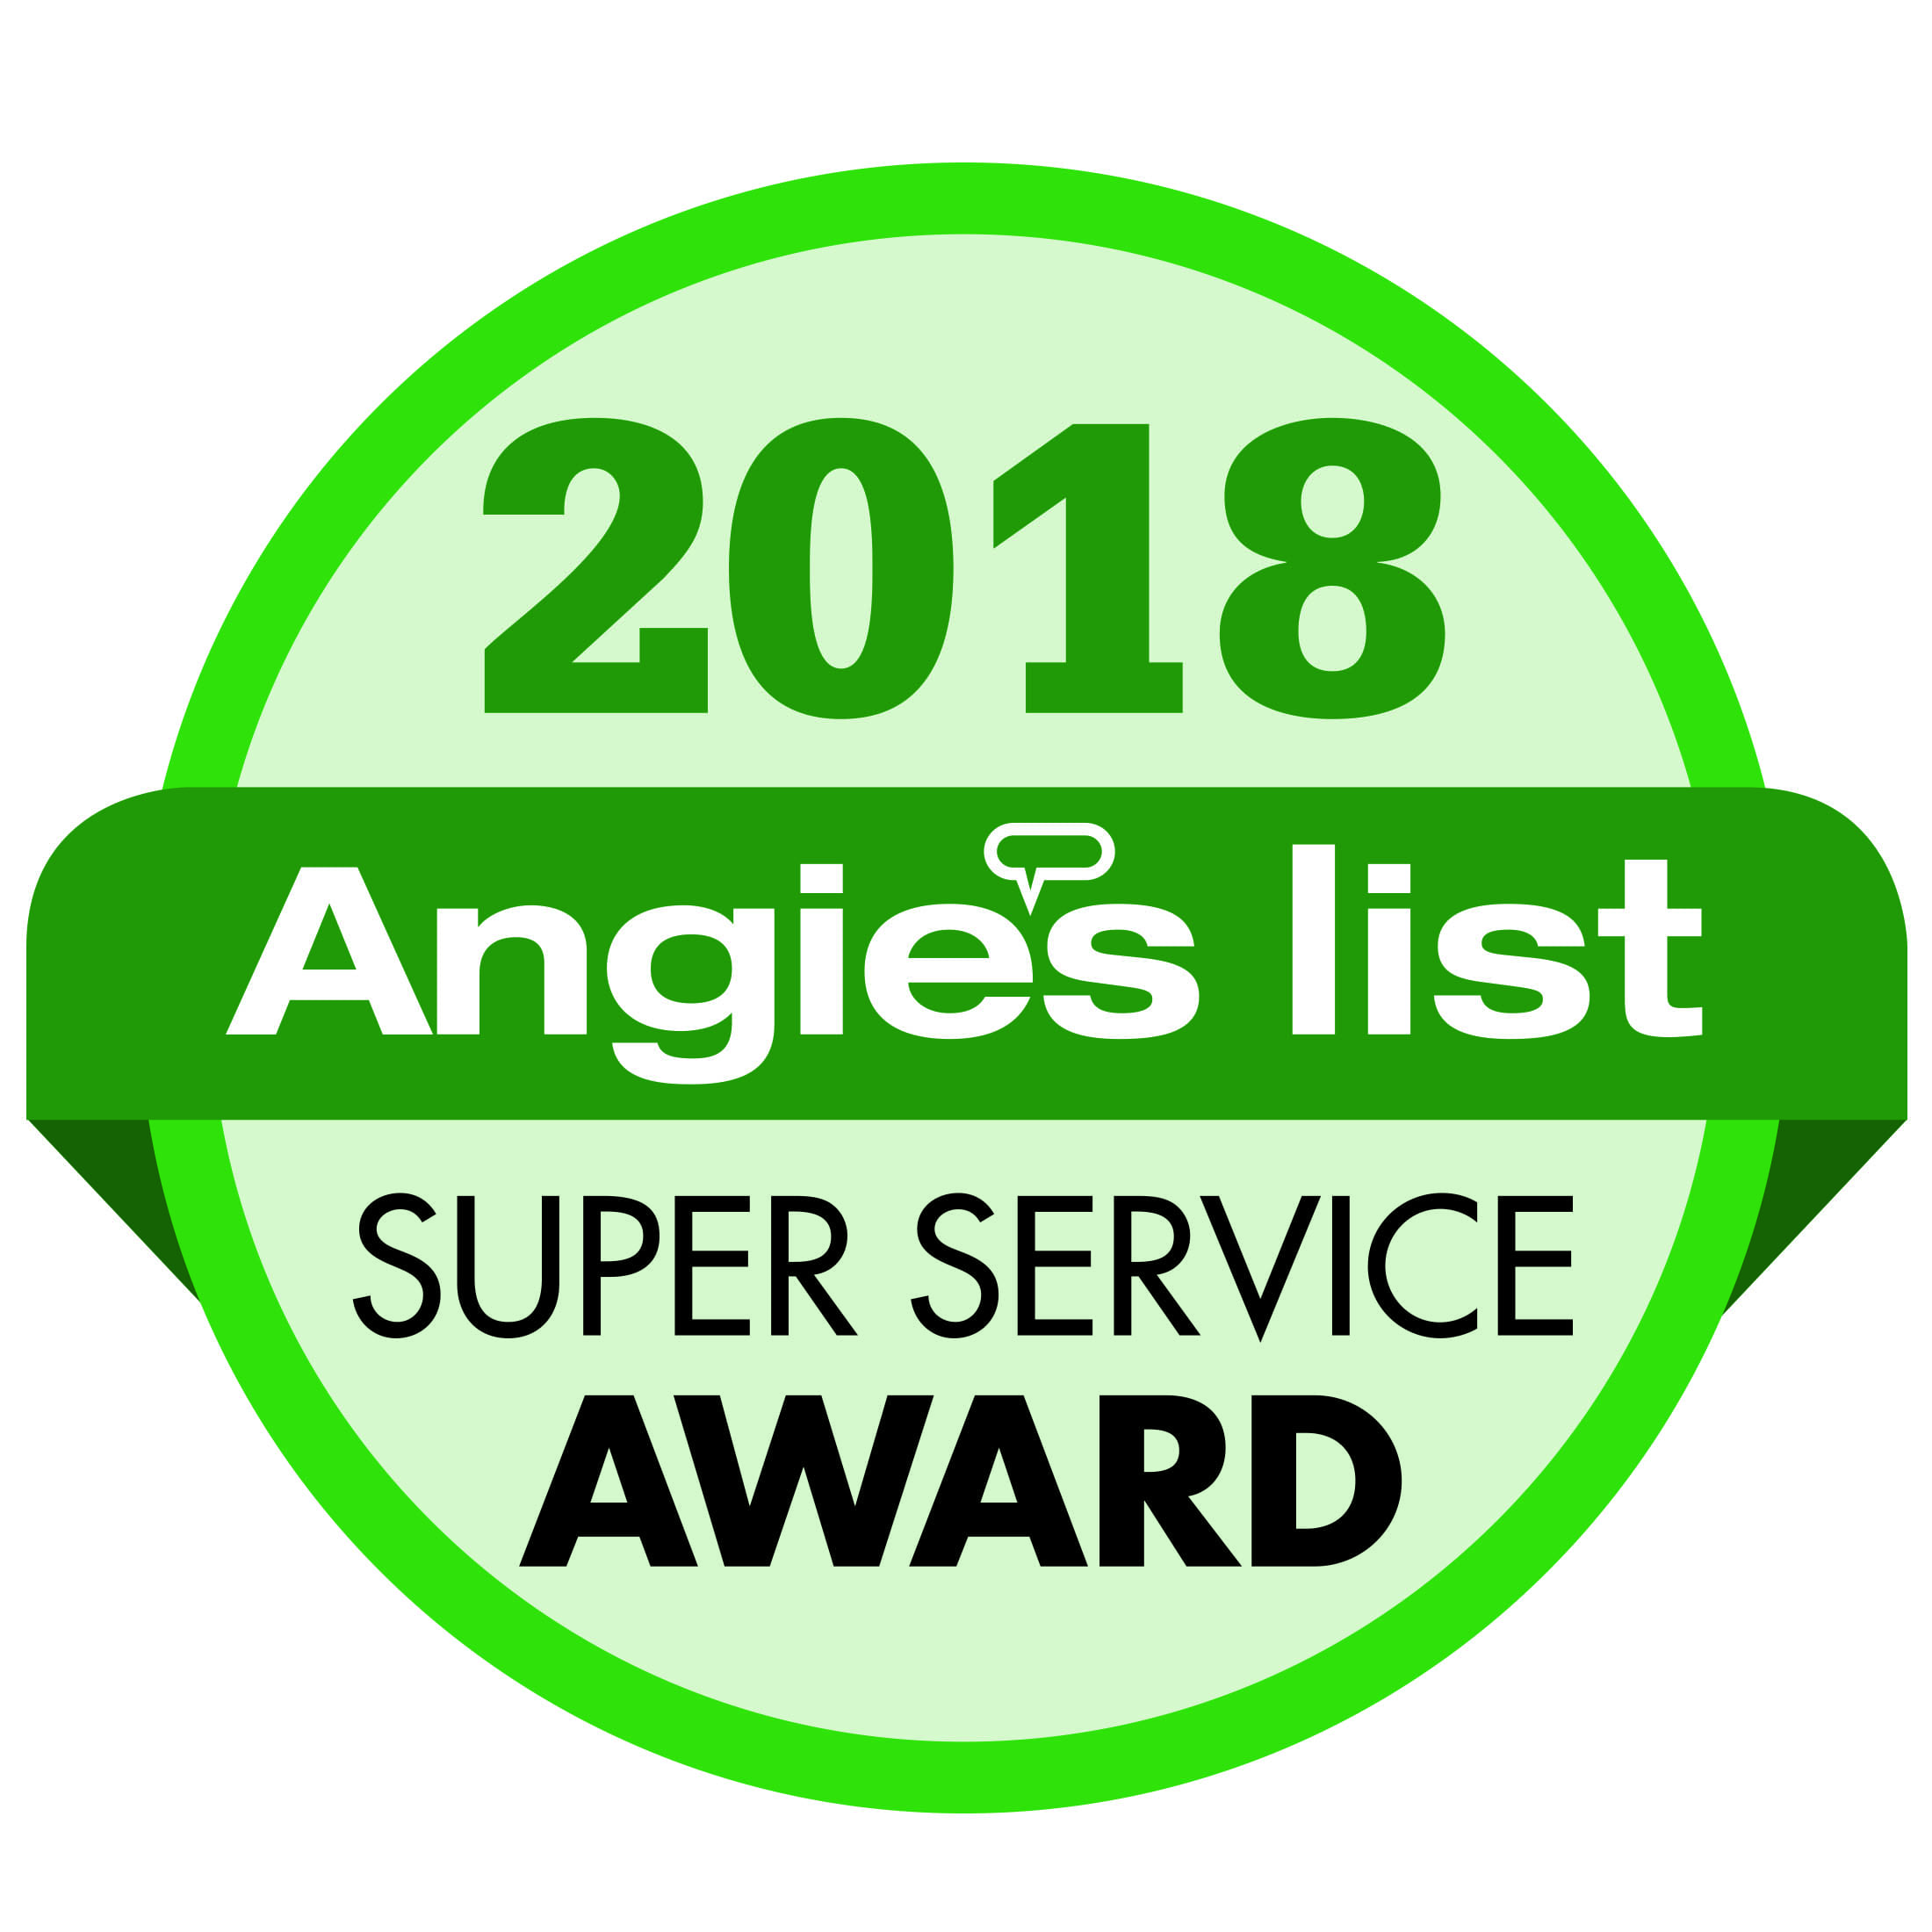 Our washington DC junk removal service has a top rating on Angie's List